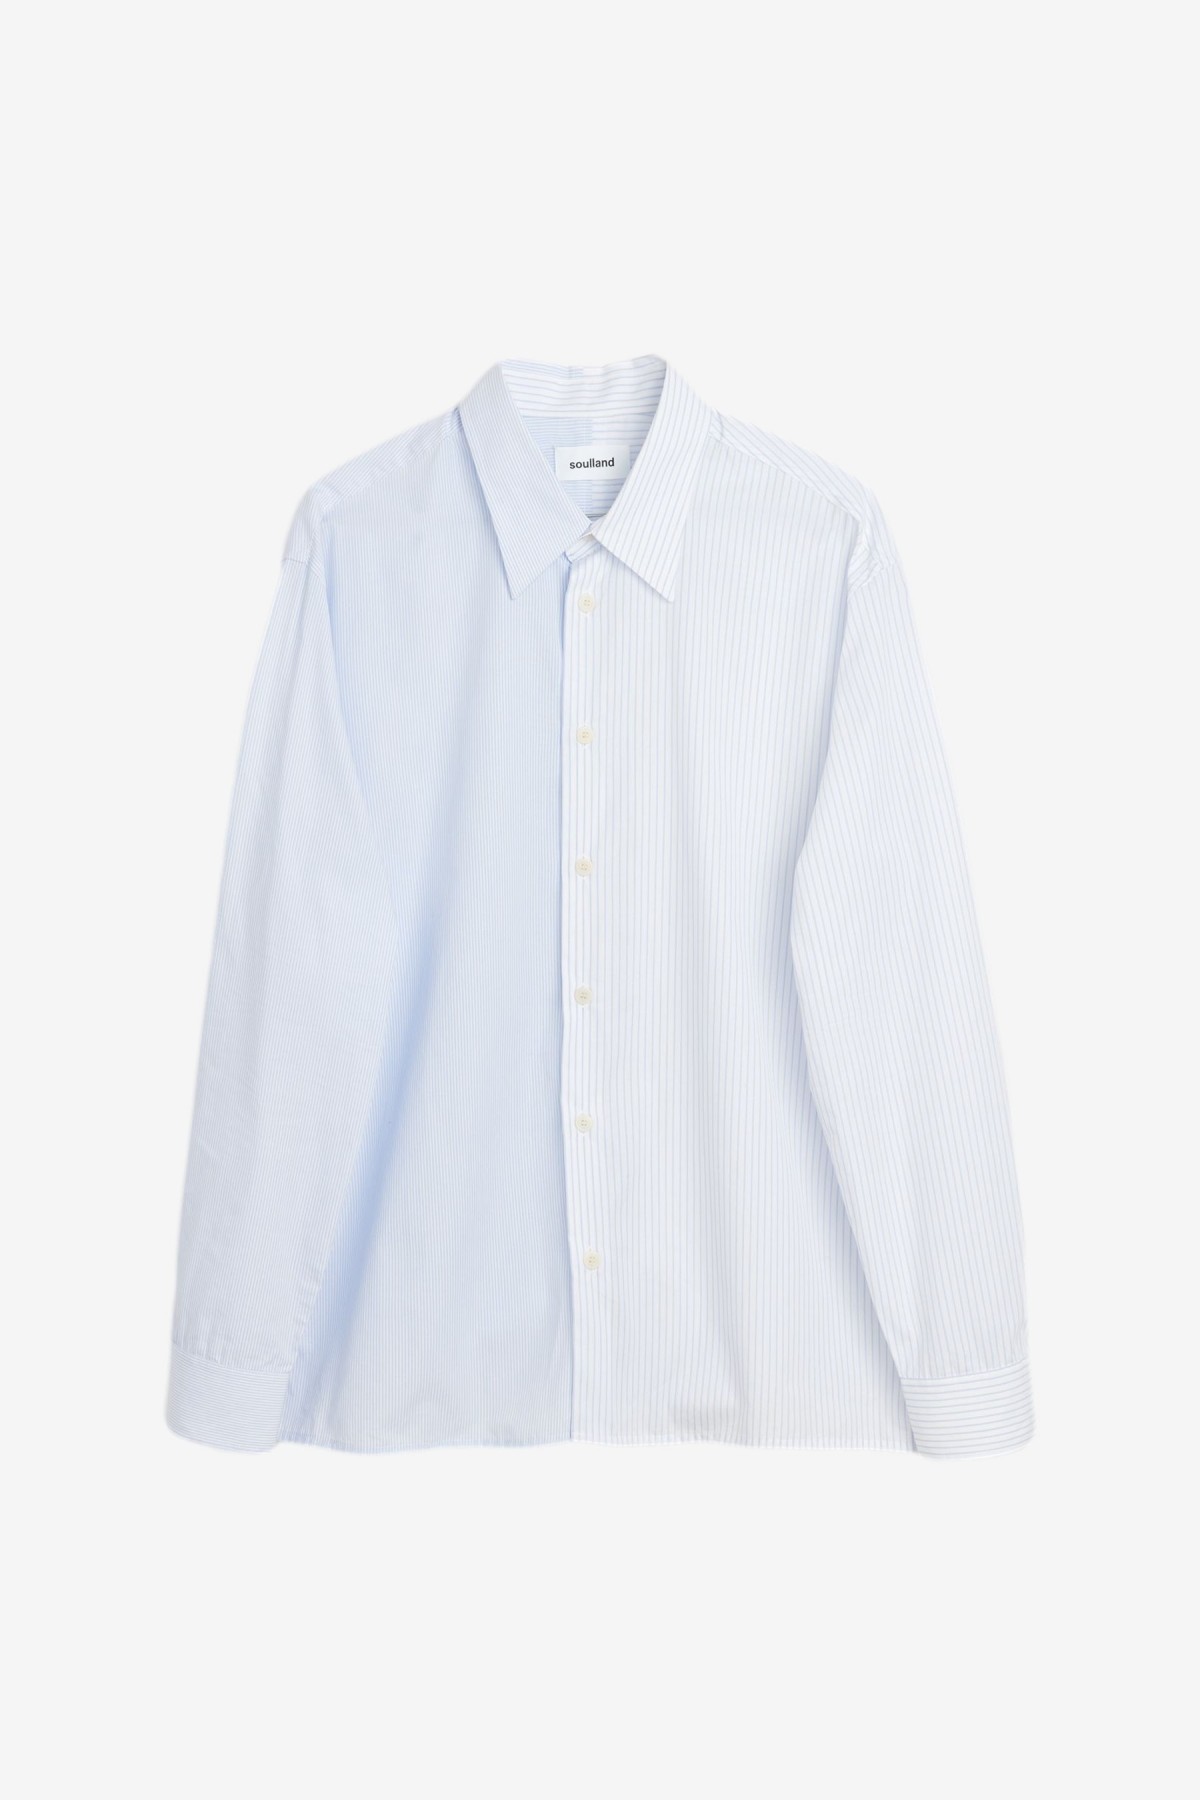 Soulland Perry Shirt in Blue Pinstripe